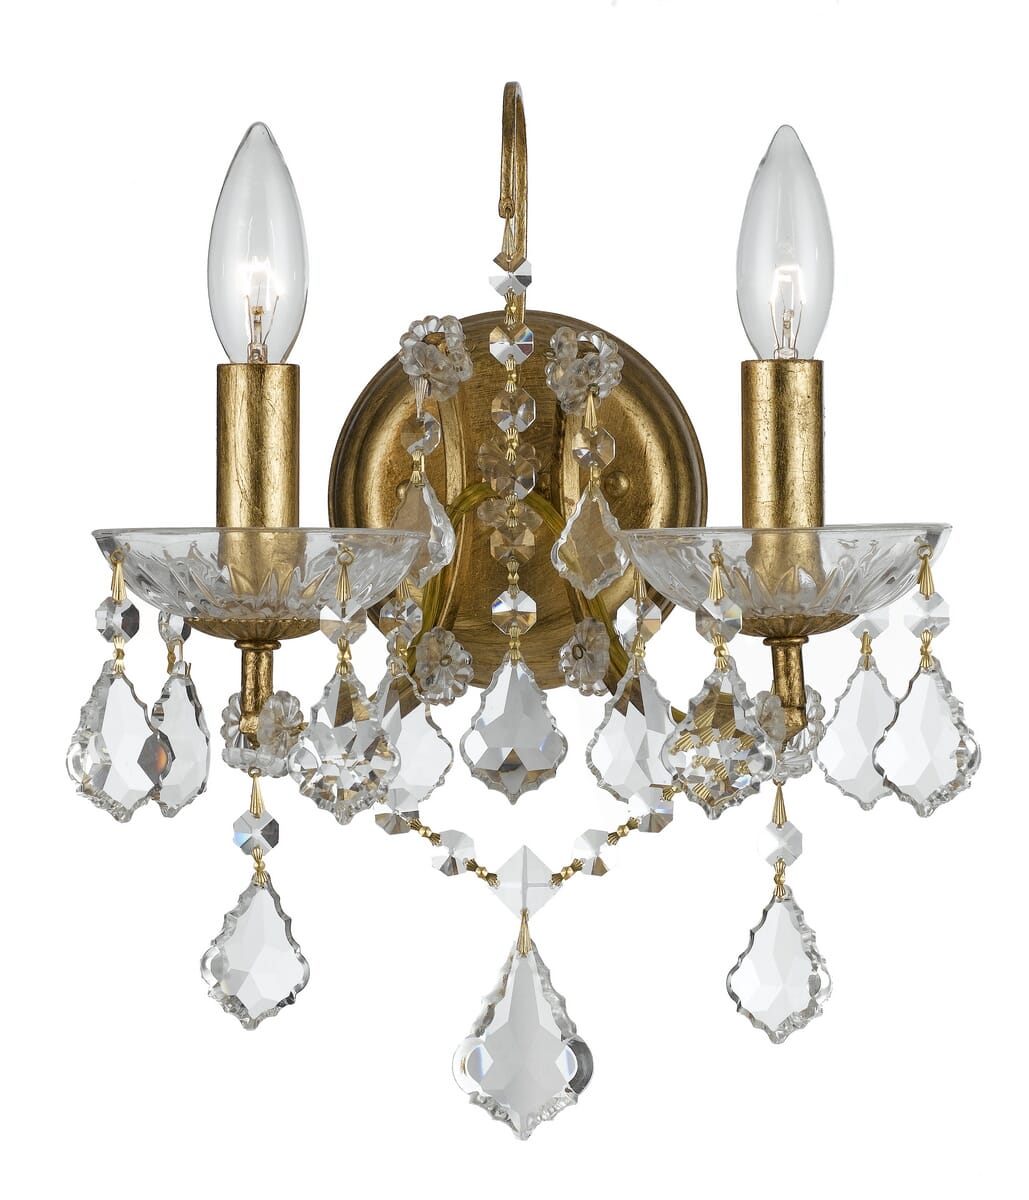 Filmore 2-Light 13"" Wall Sconce in Antique Gold with Clear Spectra Crystals -  Crystorama, 4452-GA-CL-SAQ